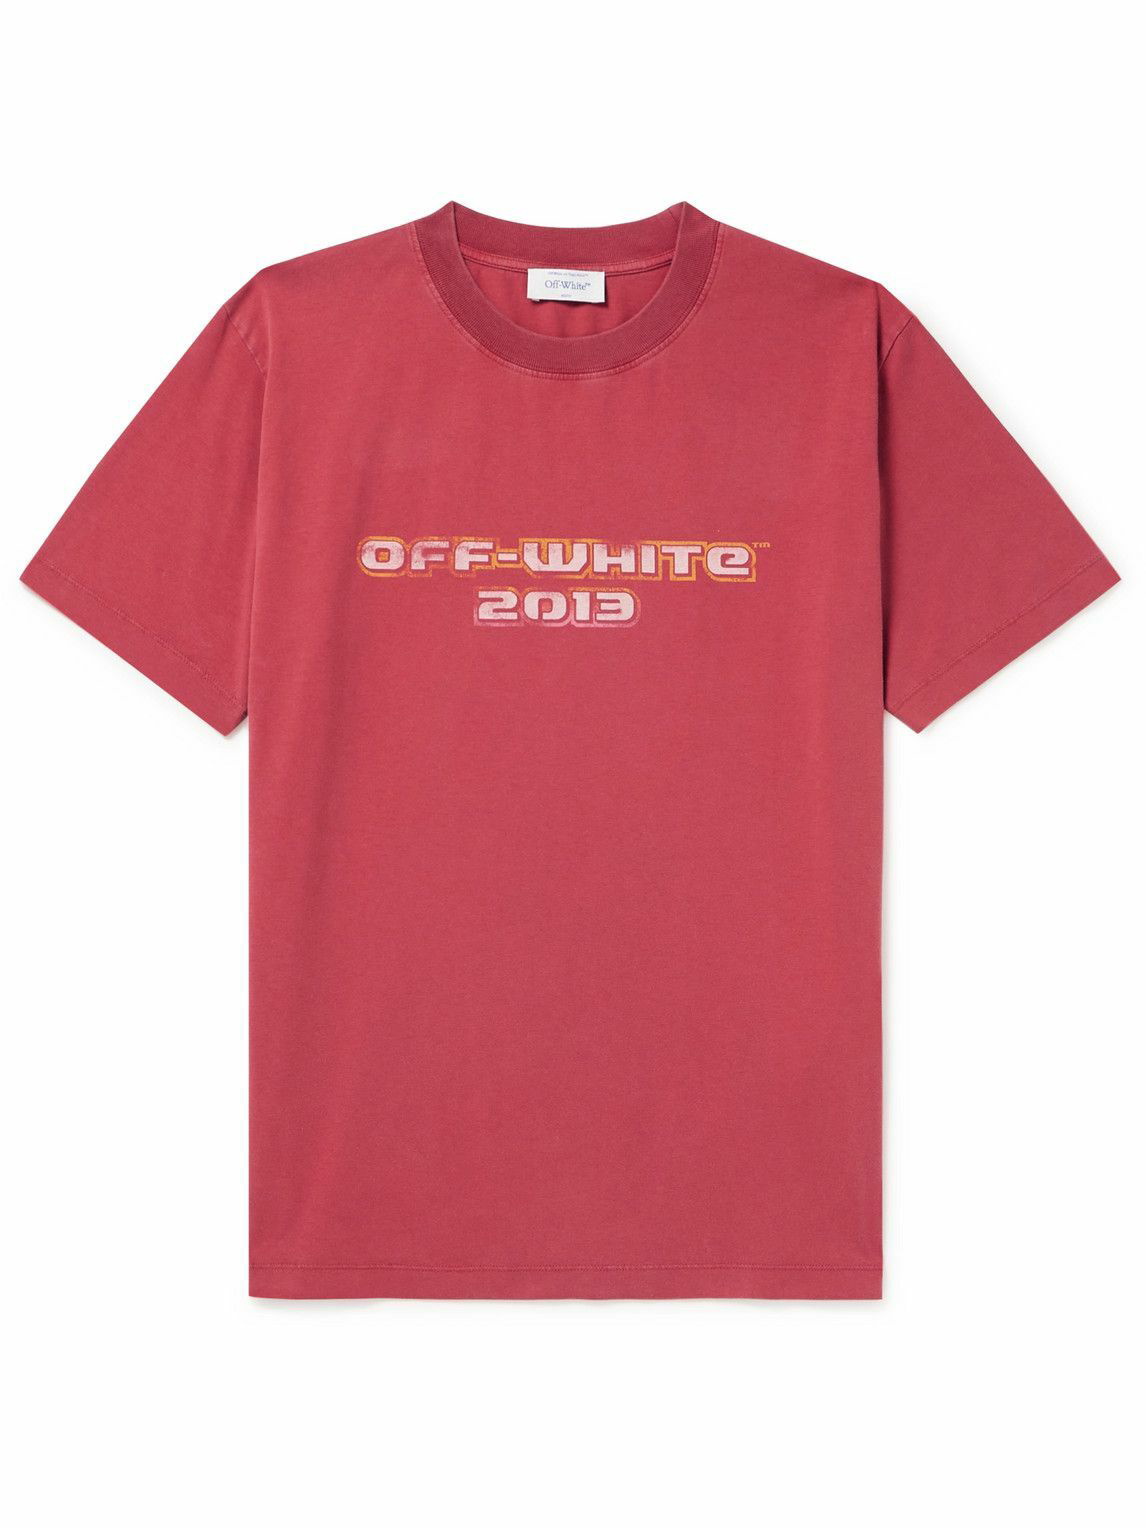 Off-White - Digit Baccus Logo-Print Cotton-Jersey T-Shirt - Red Off-White